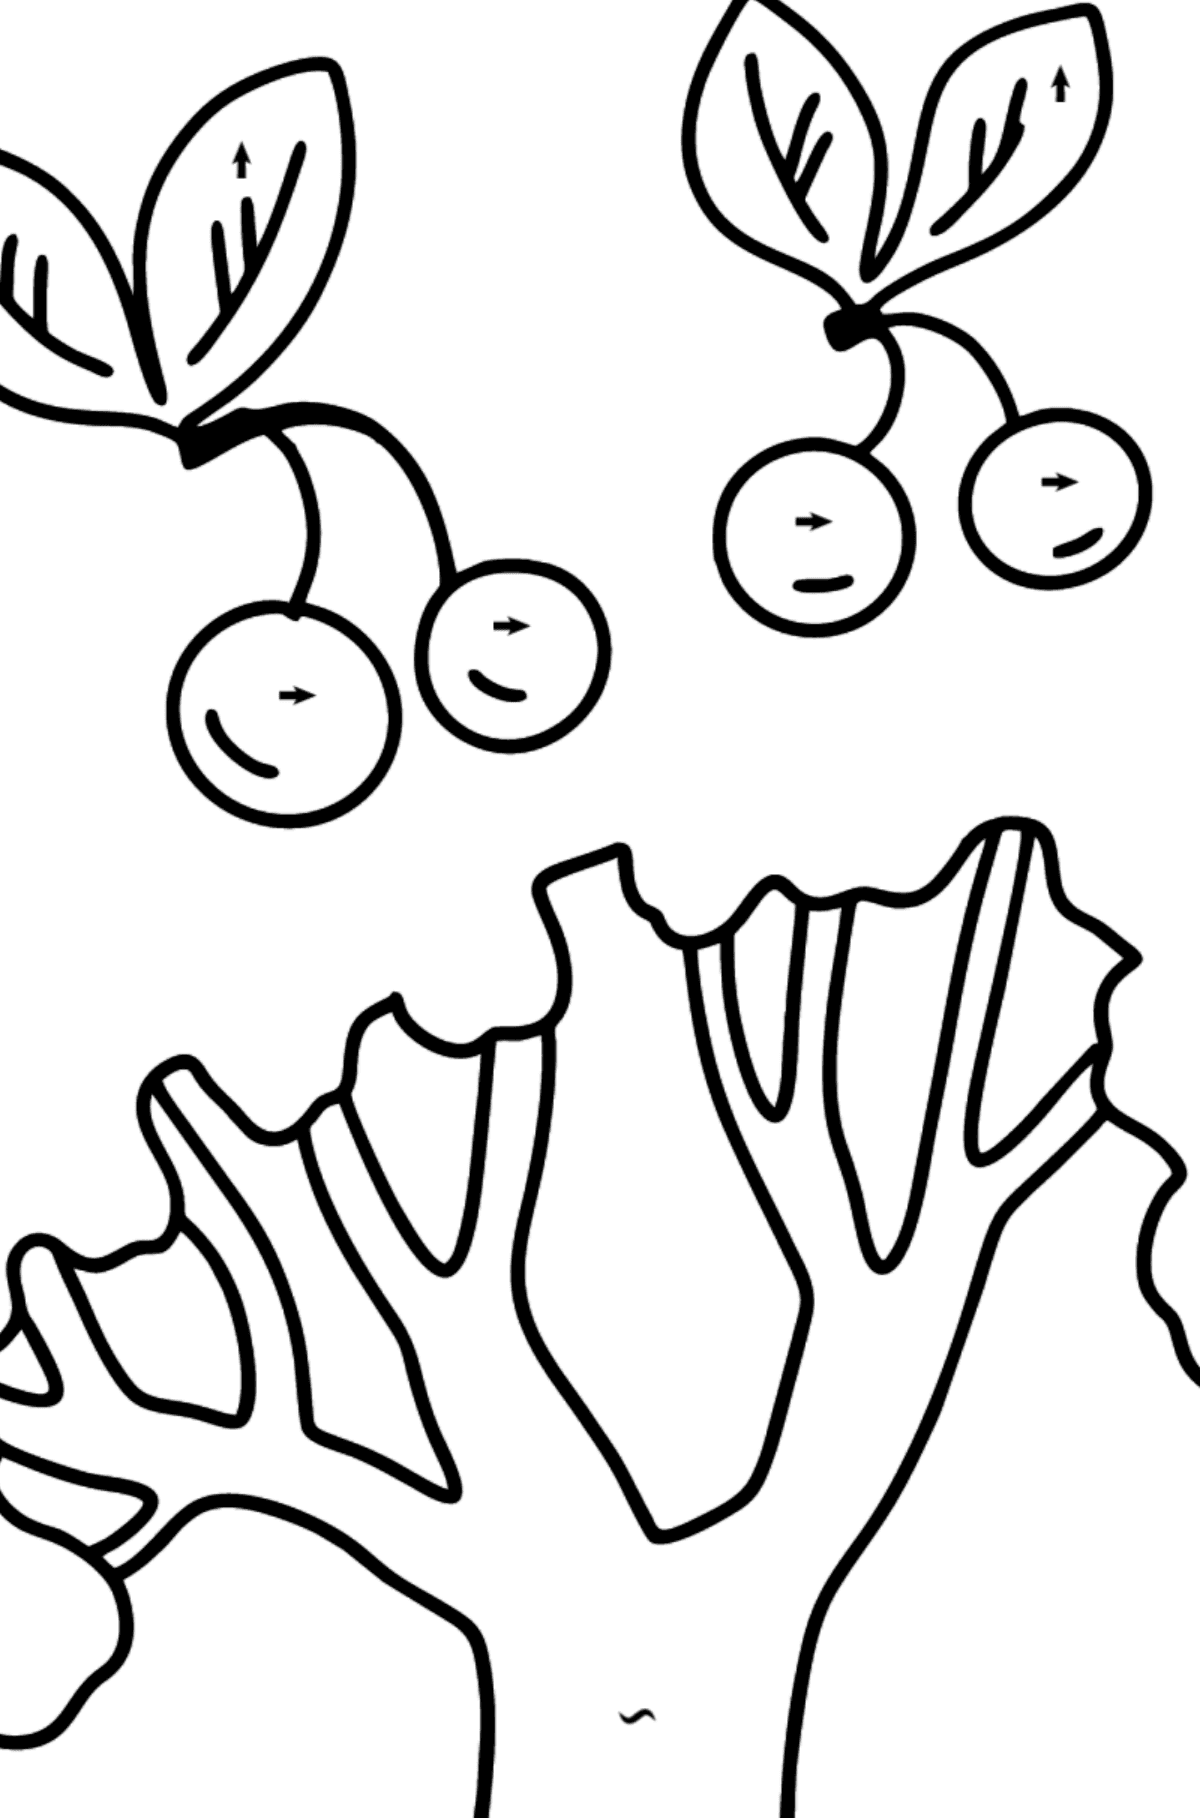 Cherry Tree coloring page - Coloring by Symbols for Kids